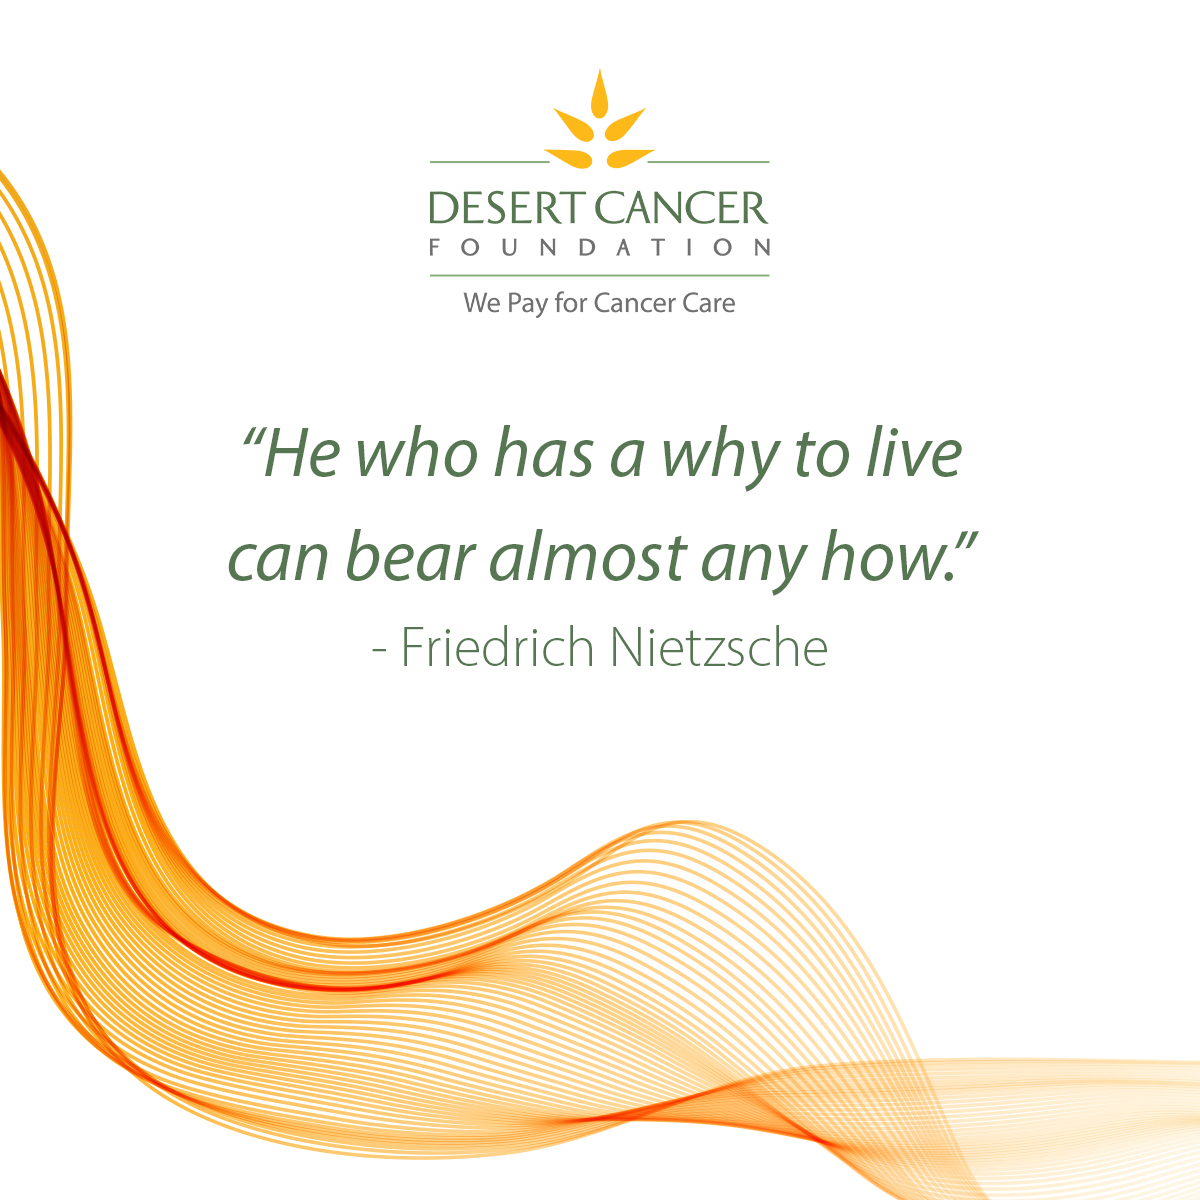 “He who has a why to live can bear almost any how.” - Friedrich Nietzsche

DCF is here to relieve you of the financial and mental stress of a cancer diagnosis. Contact us for any assistance. 😊 bit.ly/2NY07KG #DesertCancerFoundation #CoachellaValley